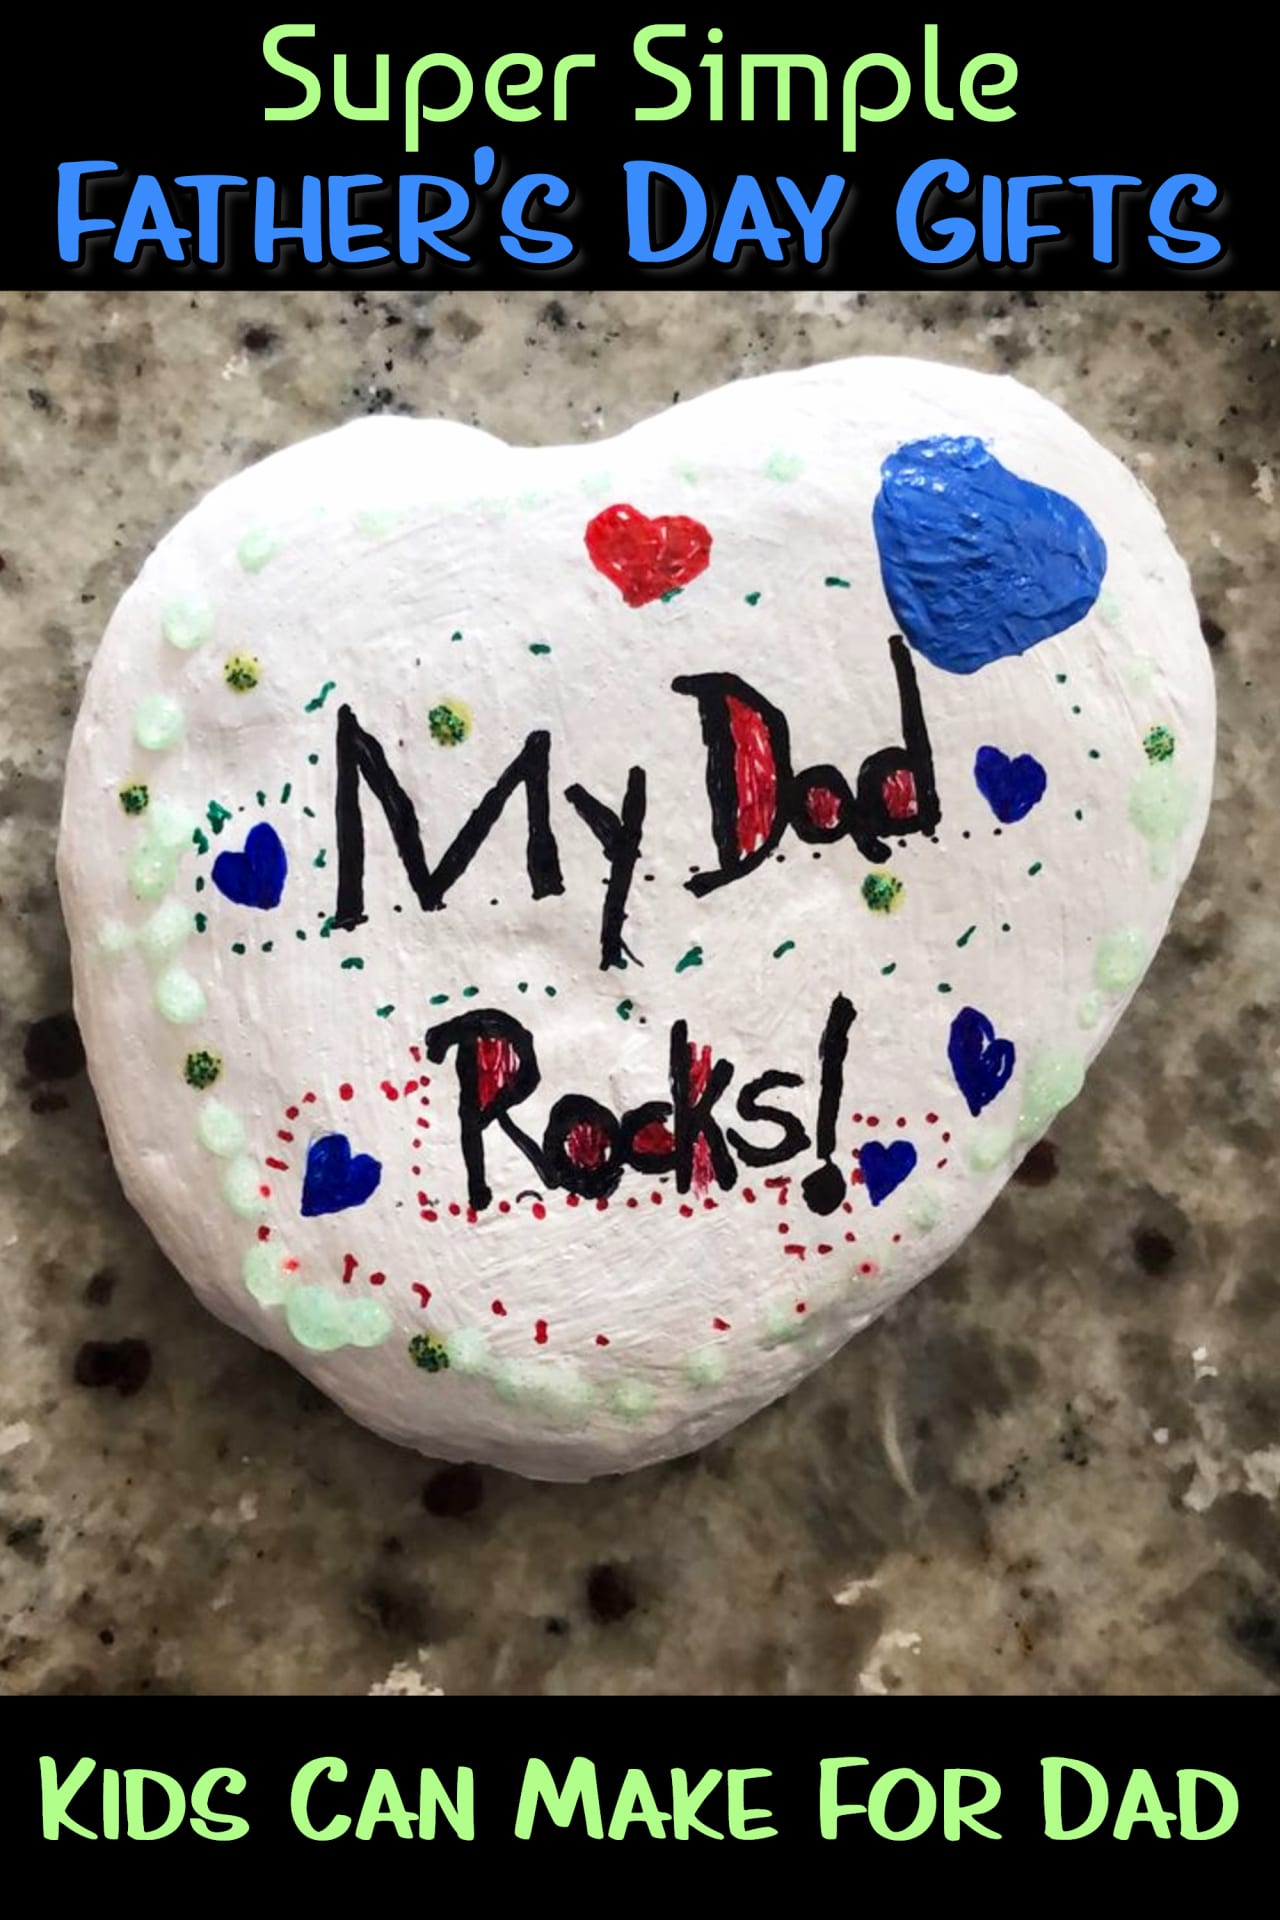 Creative Father's Day Gifts Ideas from Kids